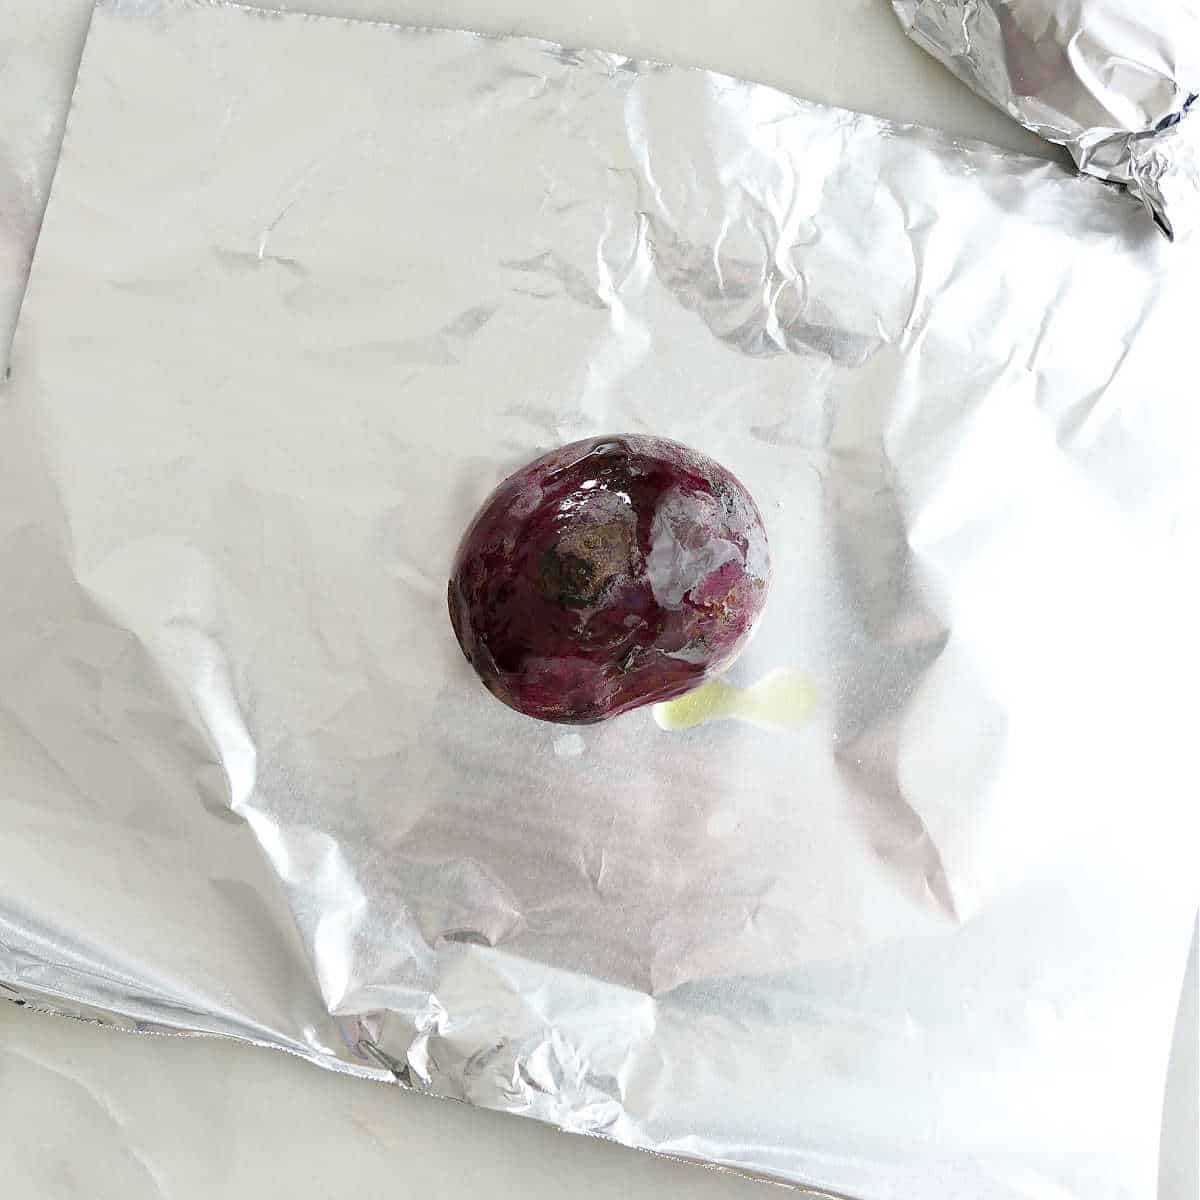 a red beet rubbed with oil on a piece of aluminum foil